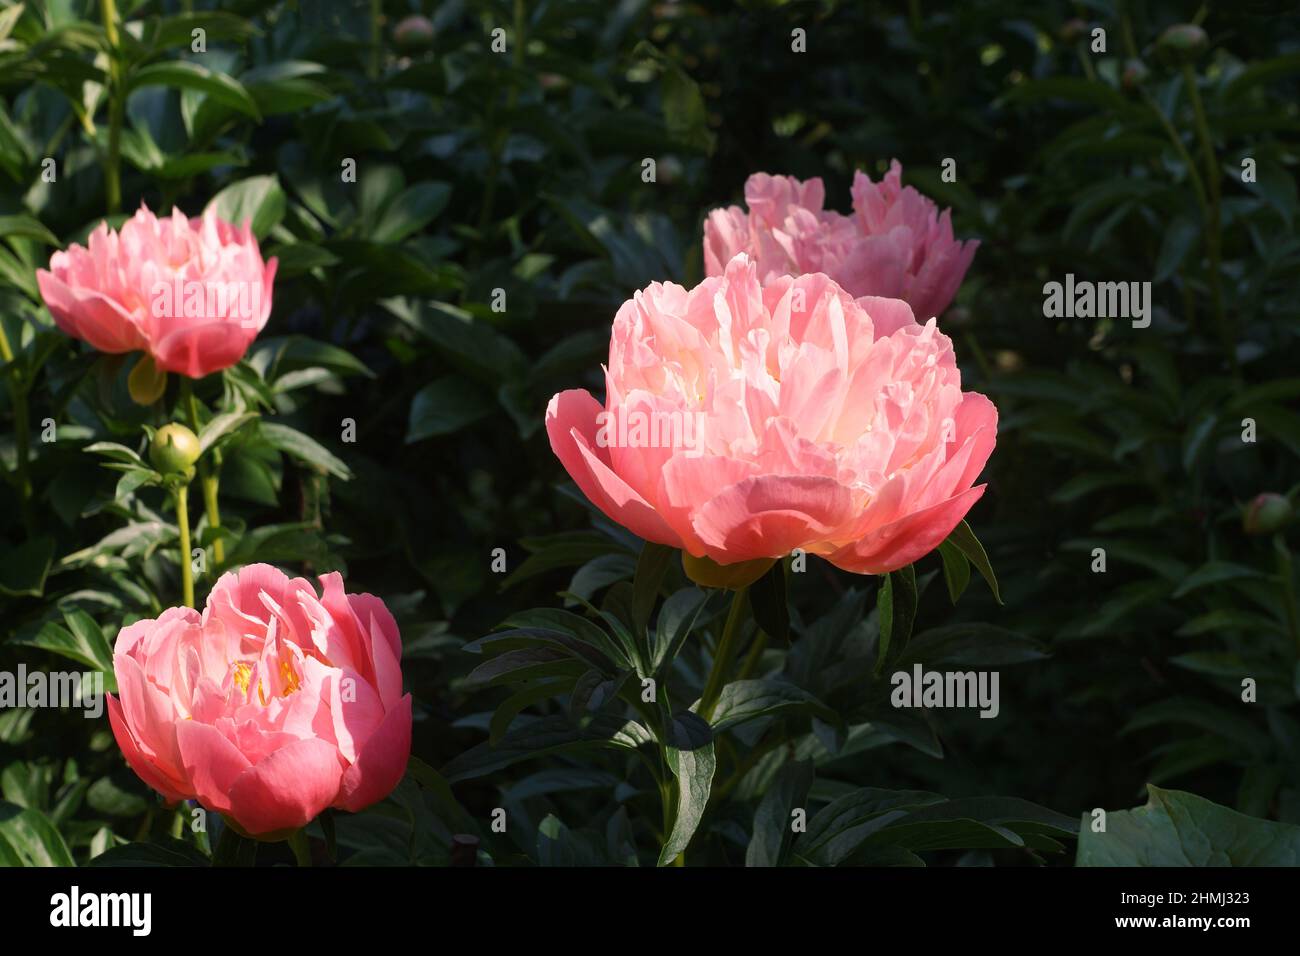 Paeonia Pink Hawaiian Coral.  Semi-double salmon pink peony flower blooms in the garden. Stock Photo